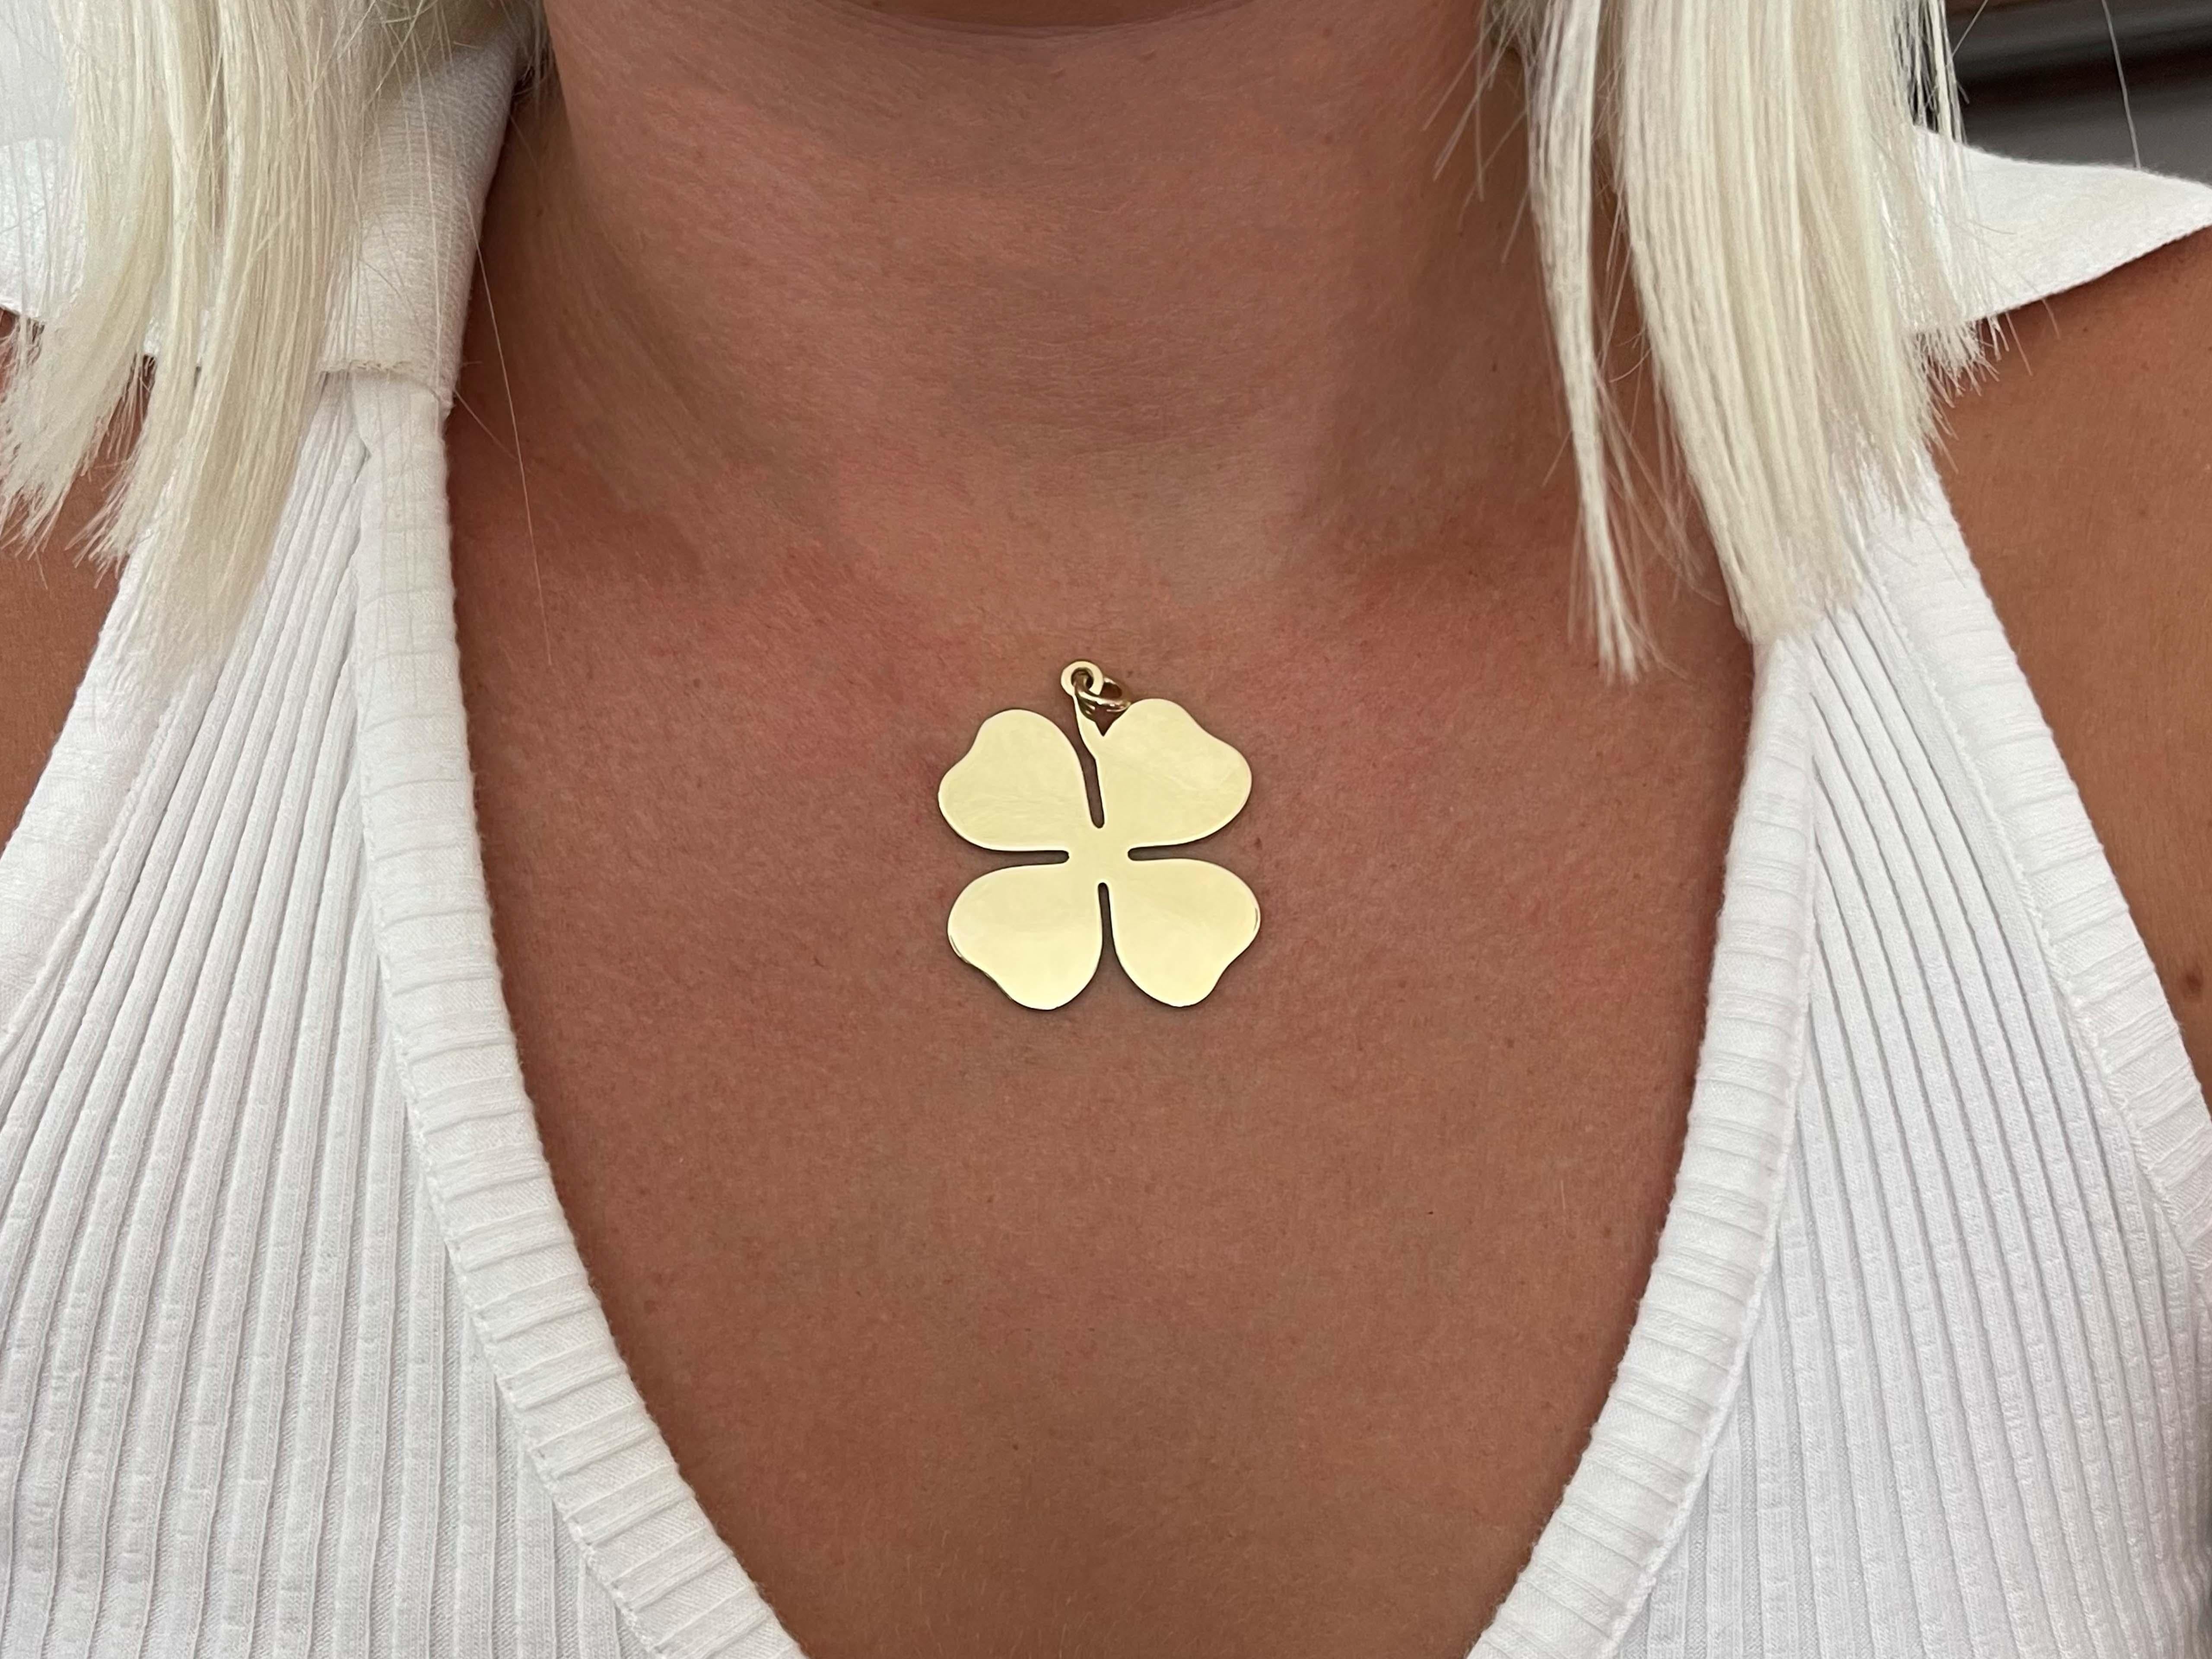 Rare Tiffany and Co. large four-leaf clover charm pendant. Made and signed by Tiffany & Co. in 14K yellow gold. Measures 37mm x 37 mm. diameter. The pendant is hallmarked 